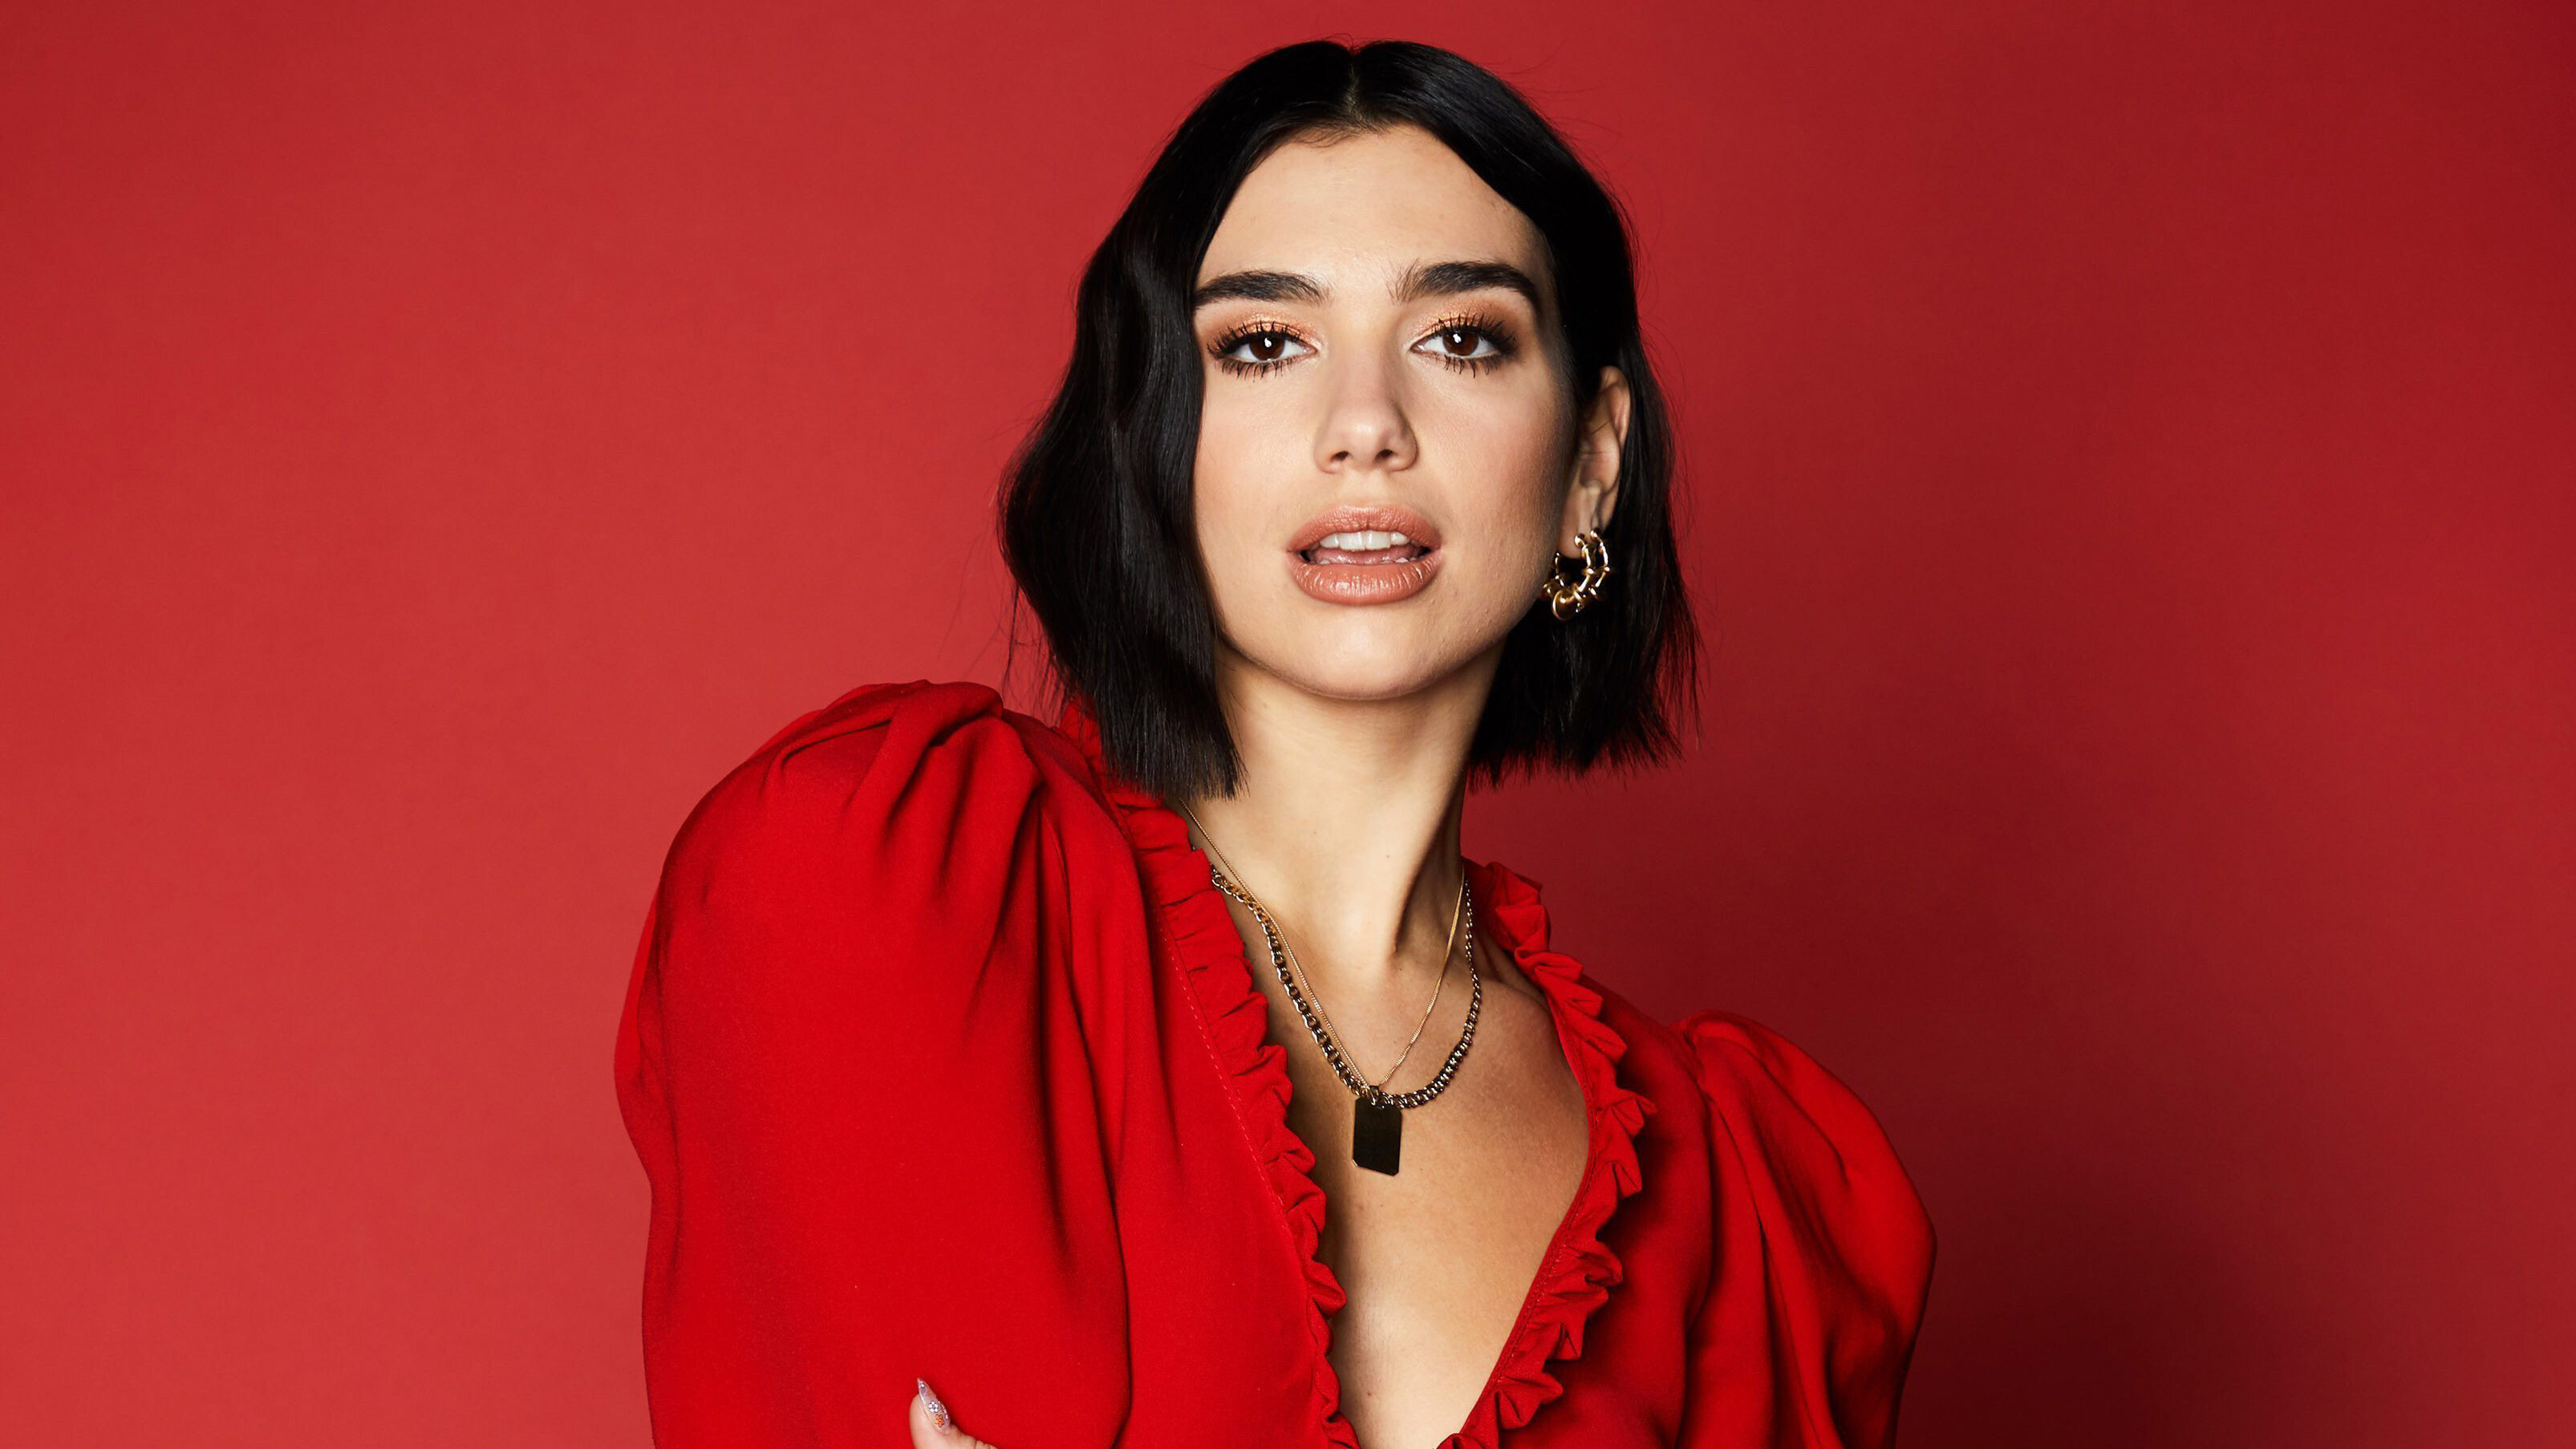 Dua Lipa: "Blow Your Mind (Mwah)" was released on 26 August 2016. 3220x1810 HD Wallpaper.